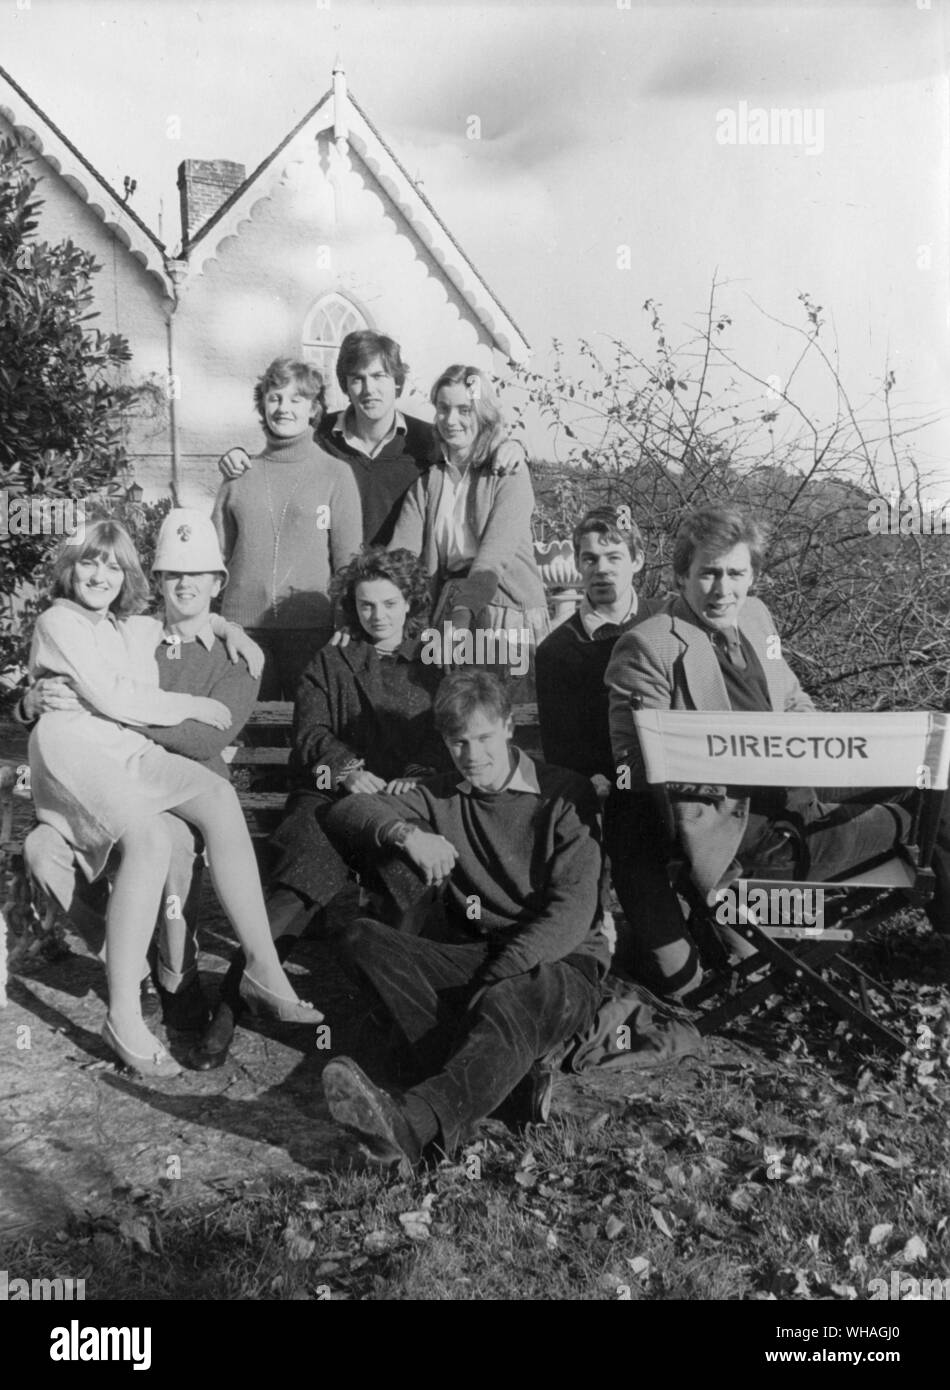 The Grenville Players 1981. Back row, right to left, Henrietta Pickthorne, Harry Herbert, Carolyne. Middle row, right to left, Chris Figg, Simon Berry, Lulu River Carnac Hugo Morgan Grenville, Clara?. Front, James Meneage. Stock Photo